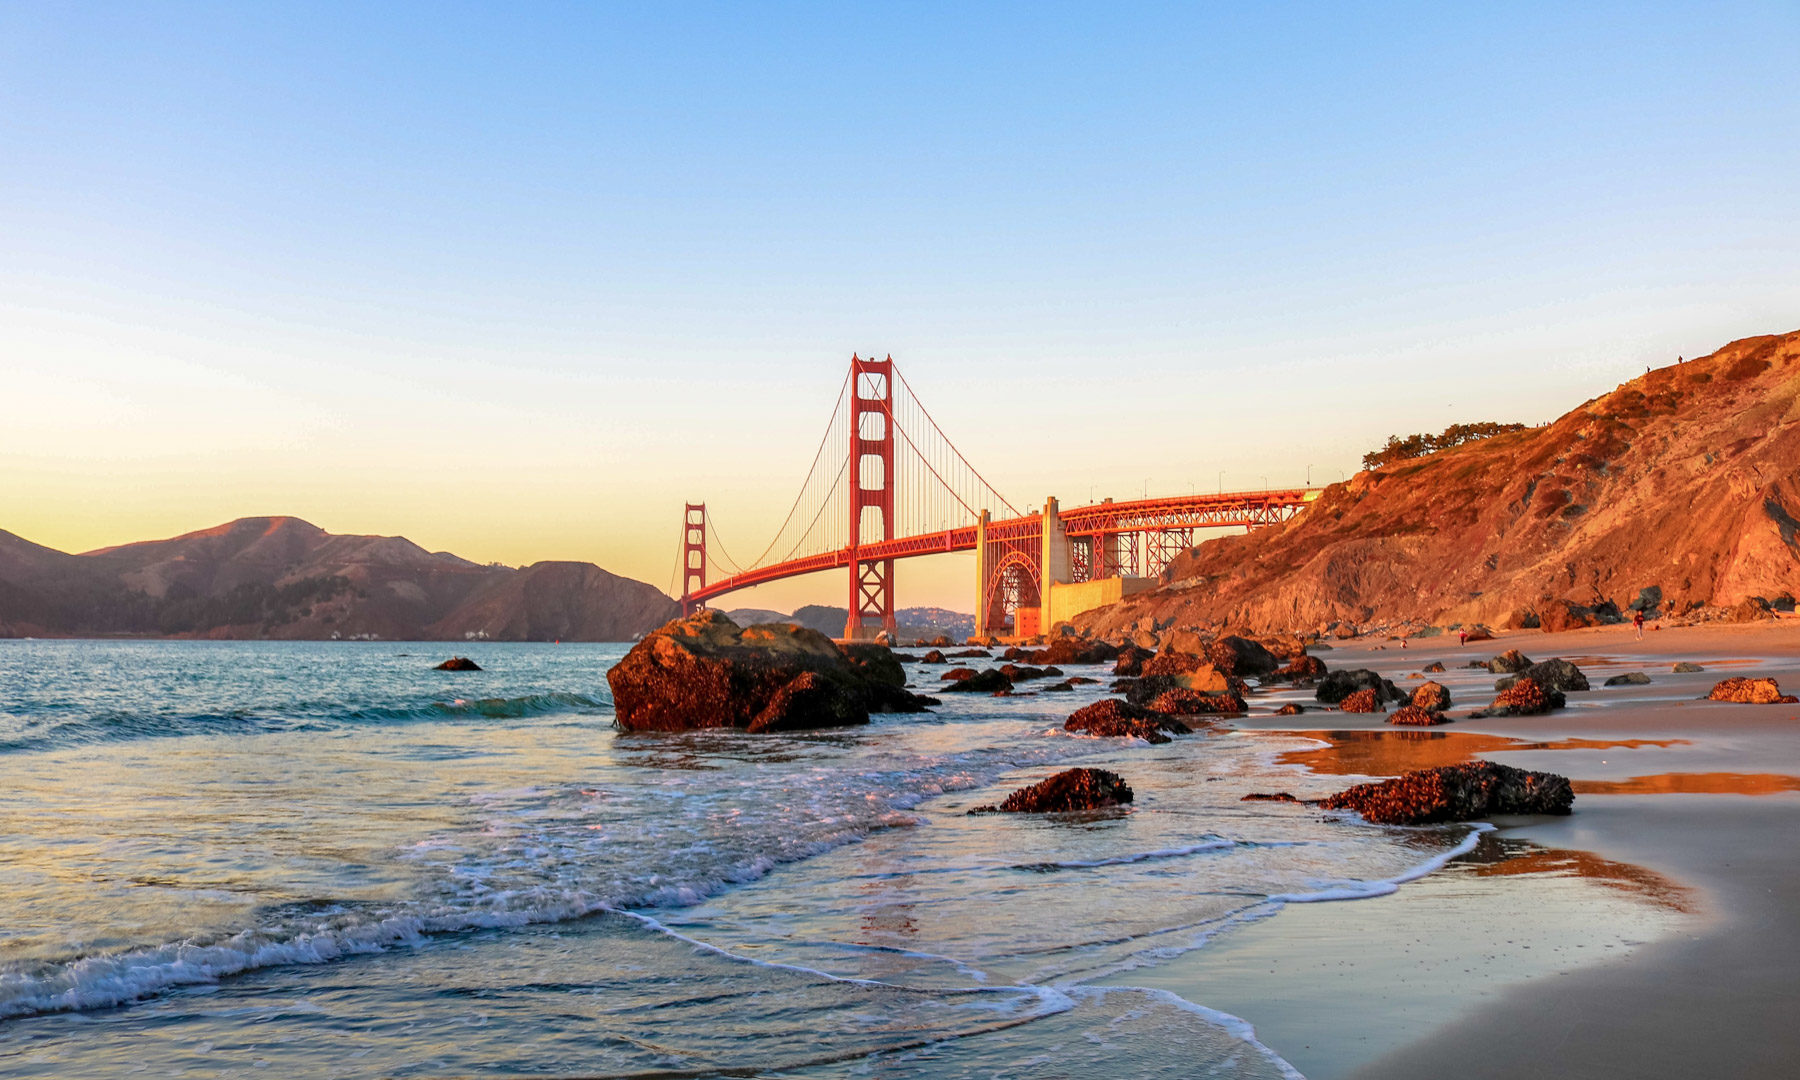 Best Boutique Hotels in San Francisco, California